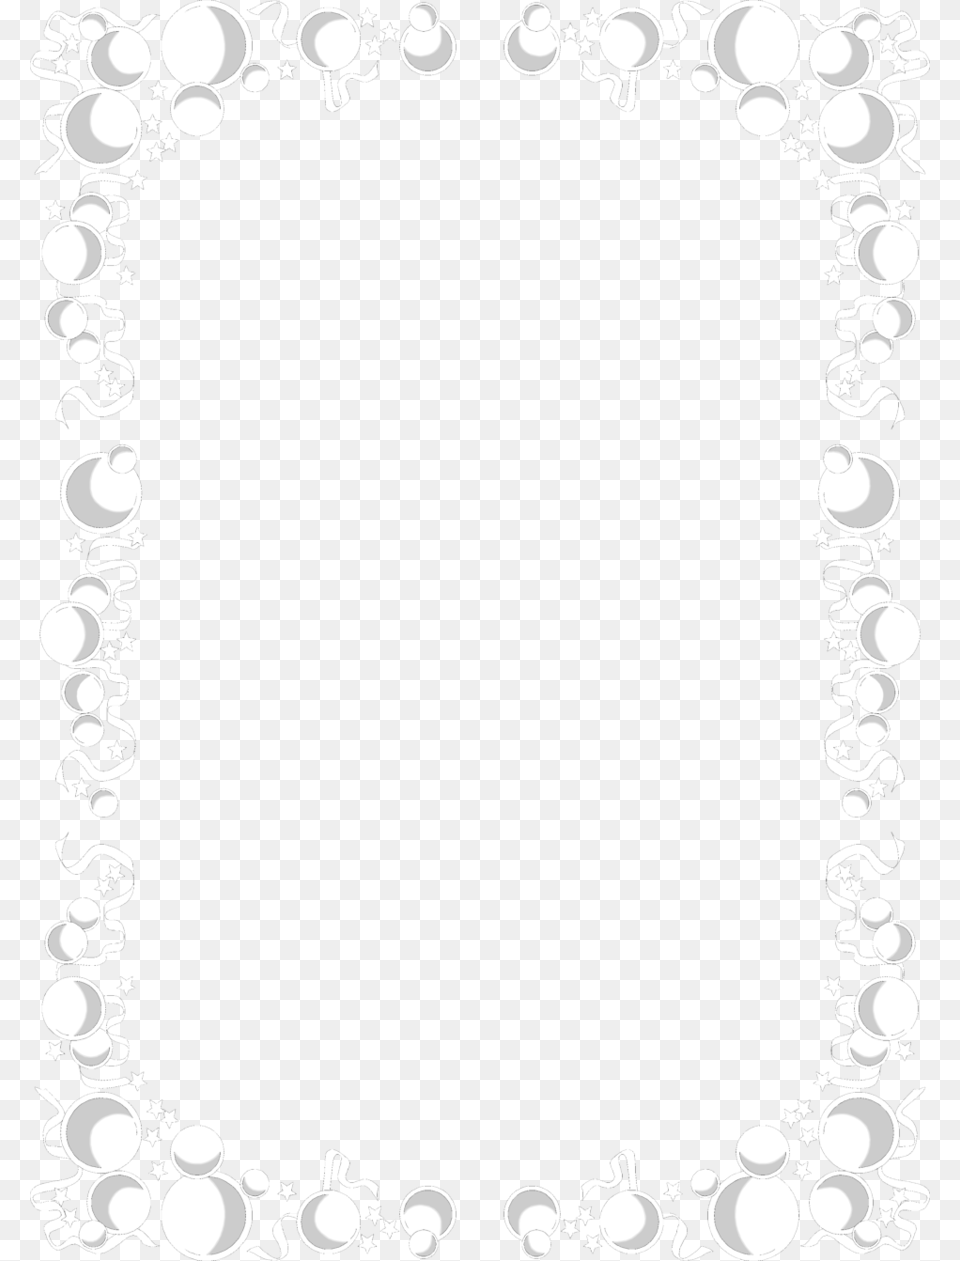 Bubble Border Clipart Borders And Frames Clip Art, Oval Free Png Download